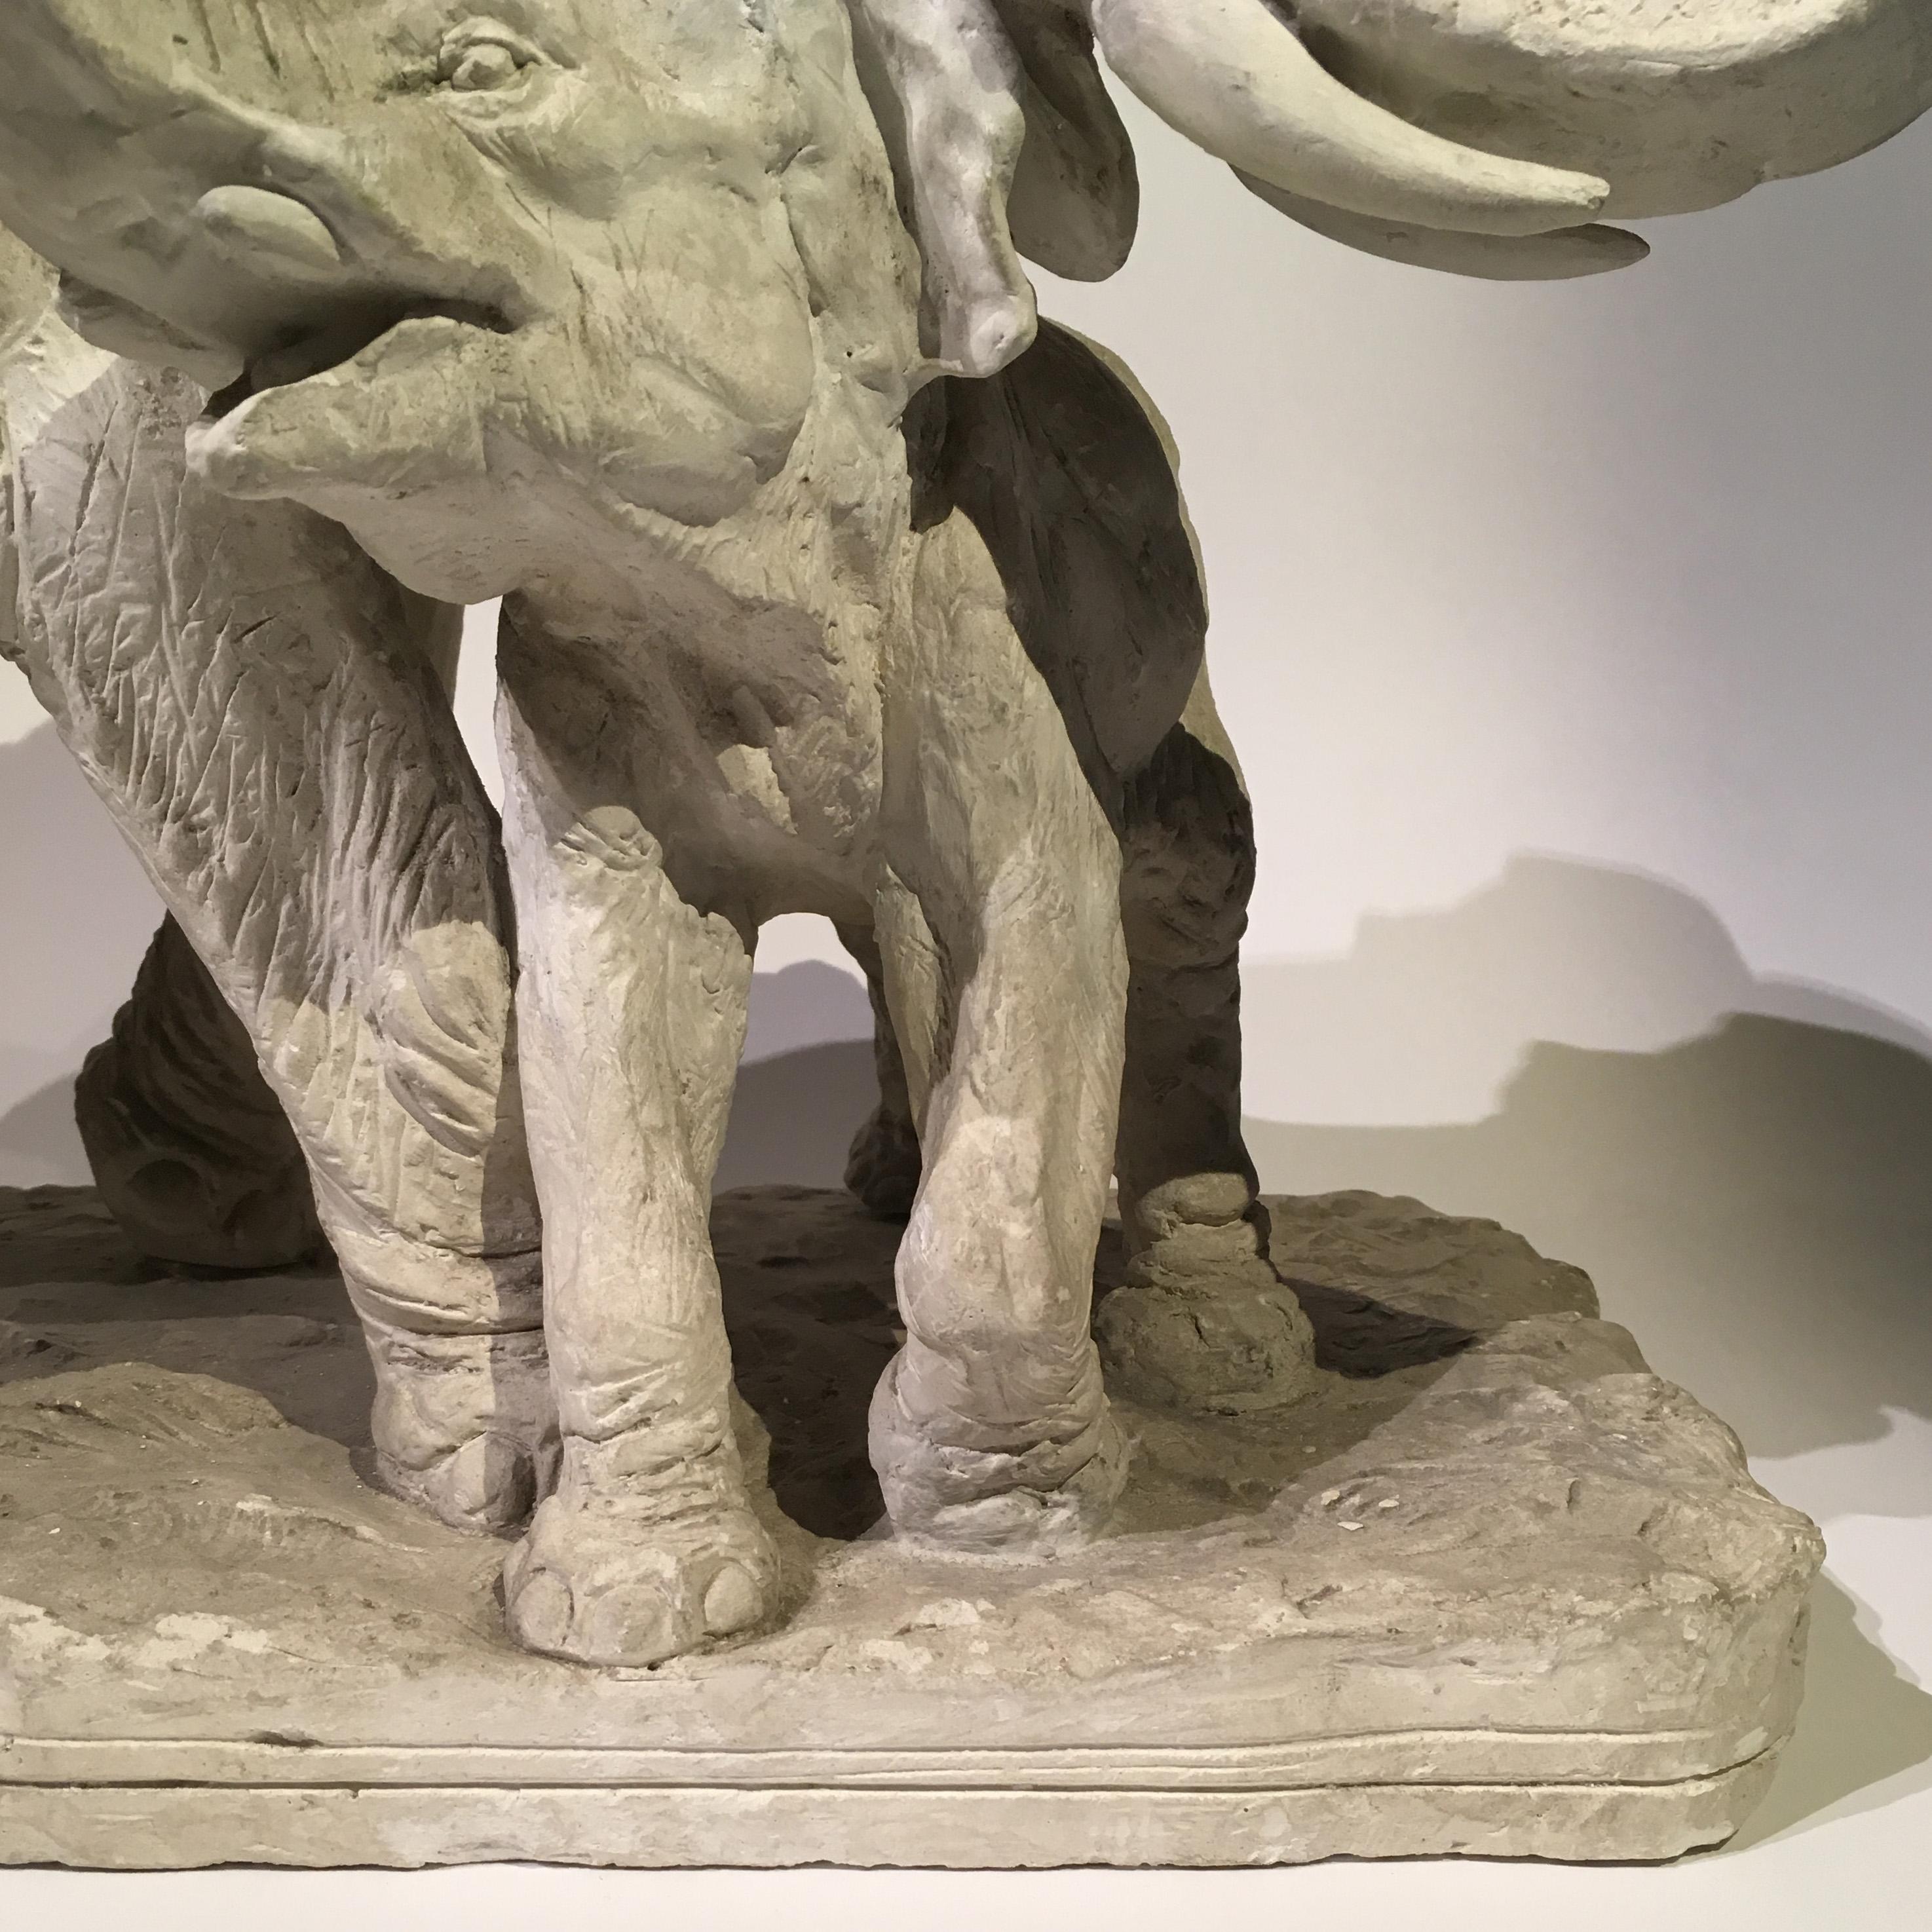 Early 20th Century Plaster Sculpture Depicting an Elephant with its Offspring 1